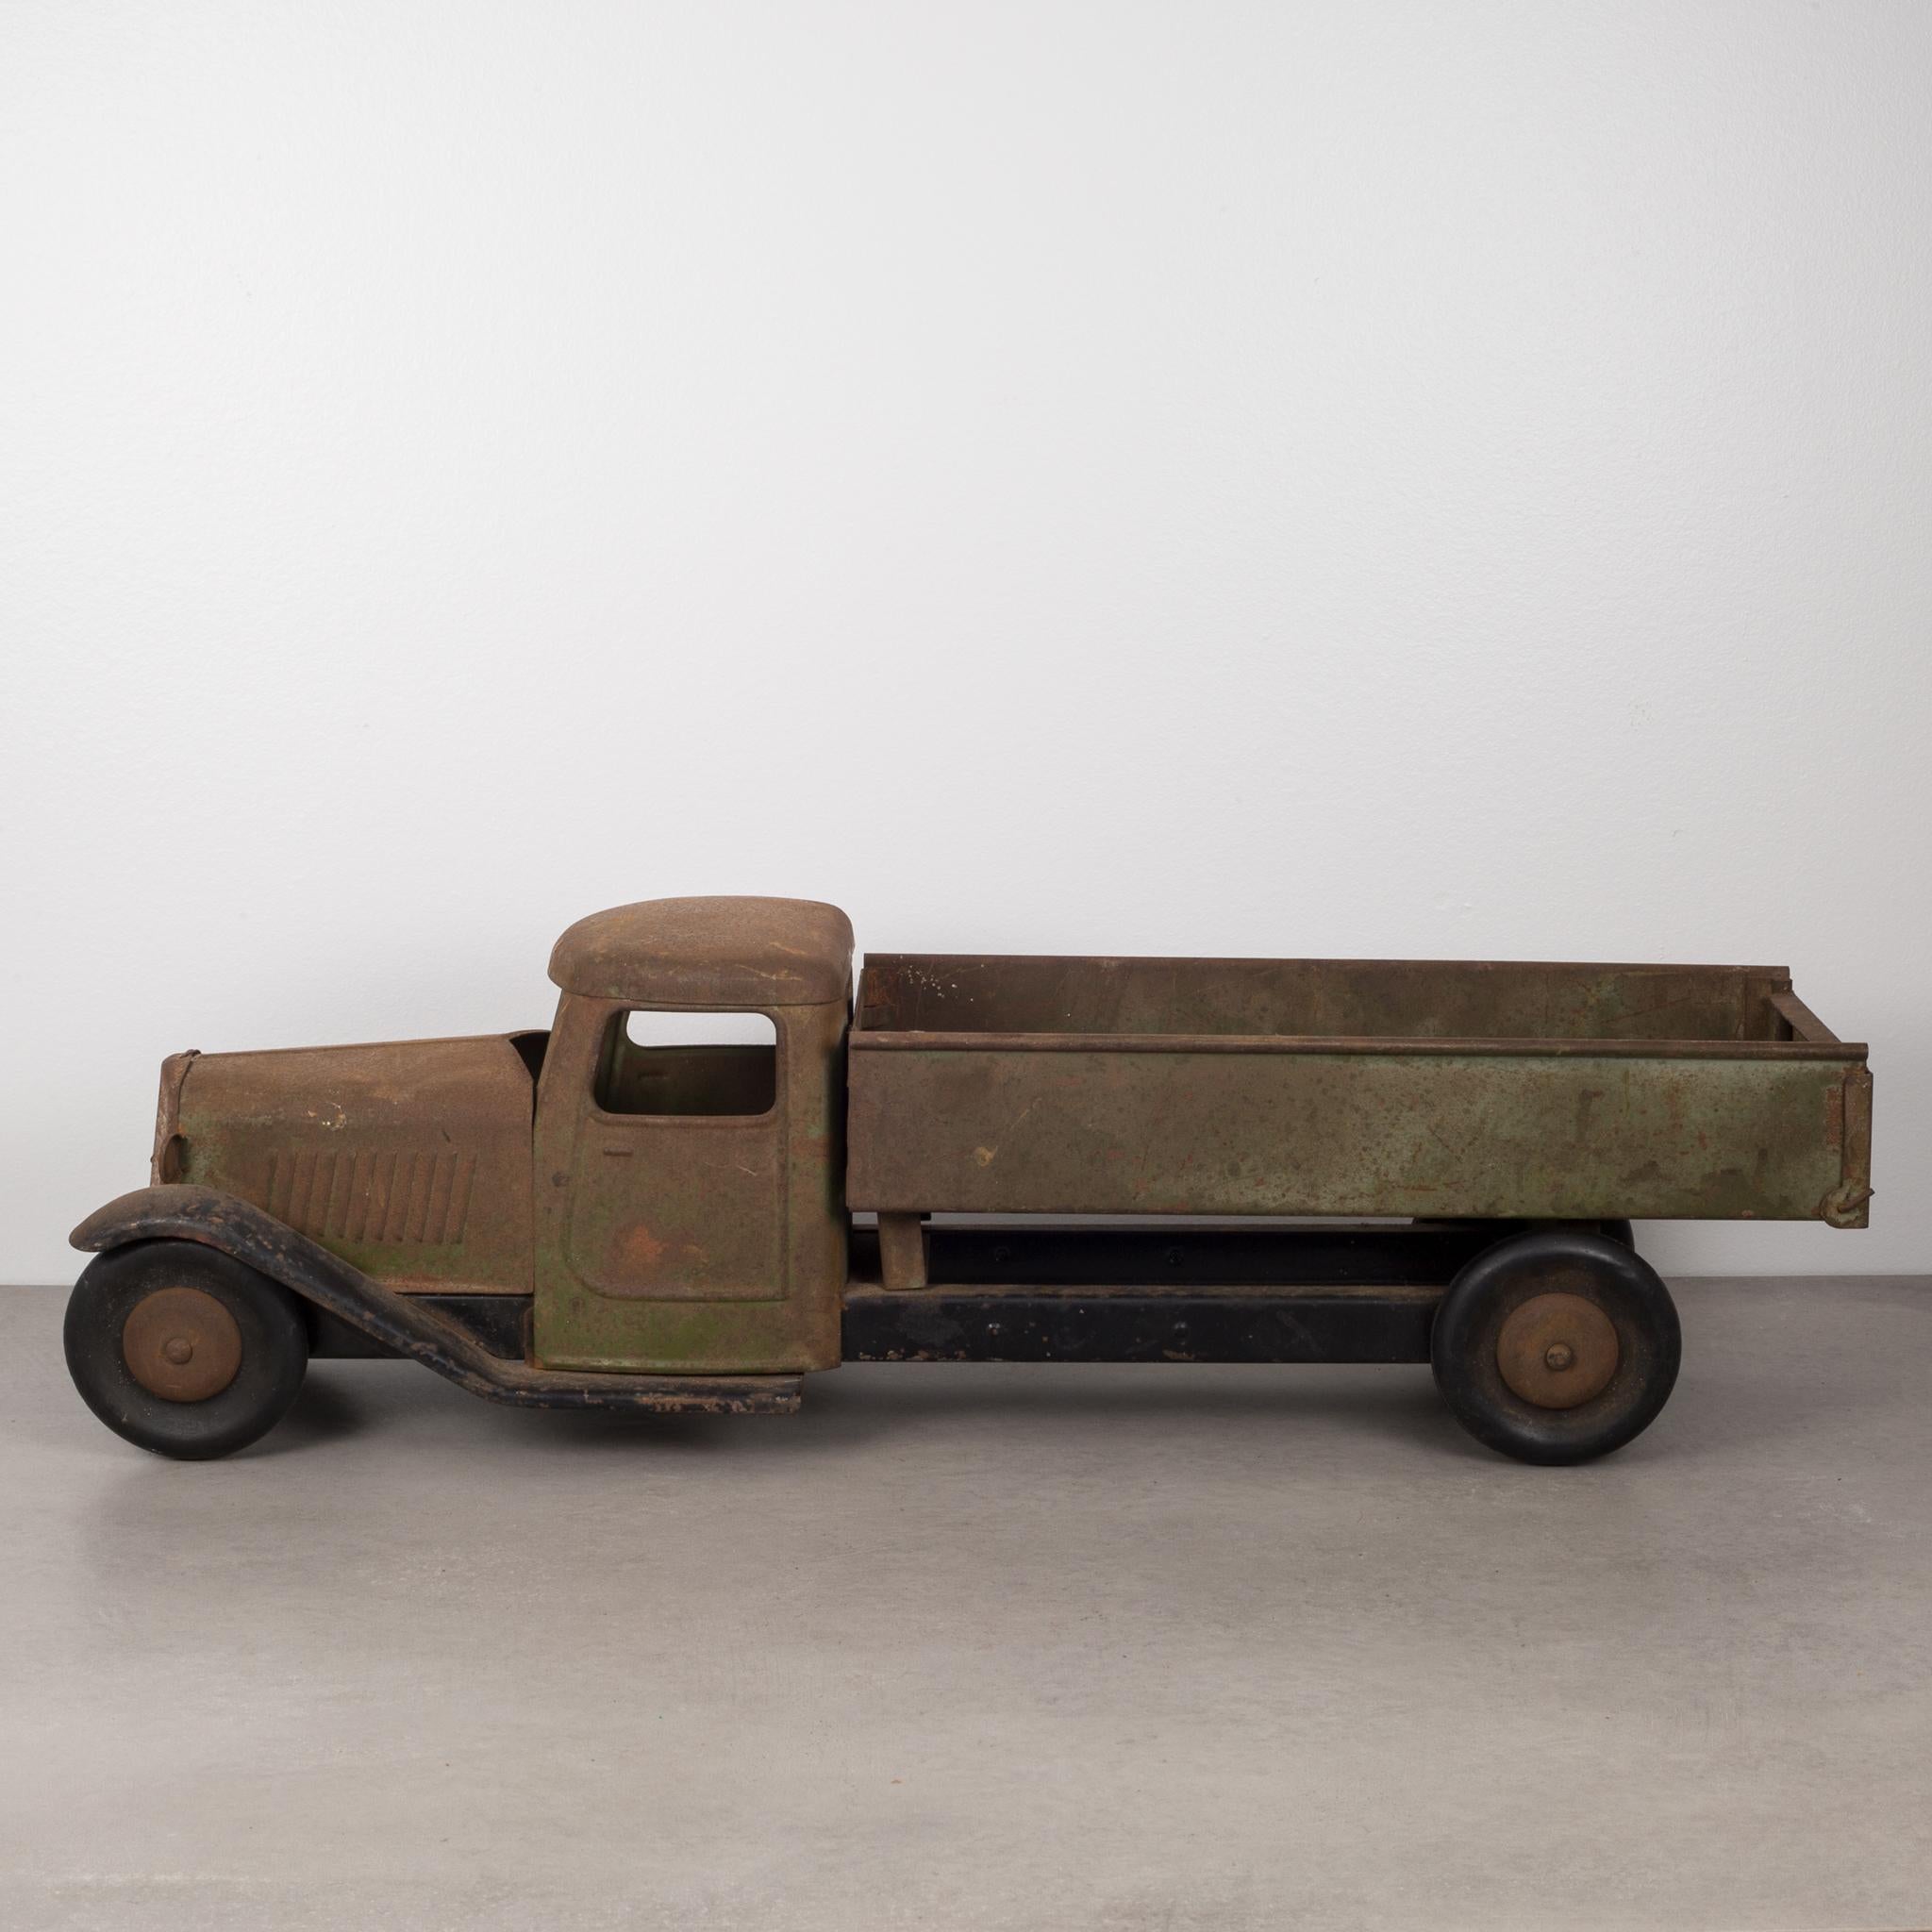 ABOUT

This is an original die cast steel toy truck with rubber wheels by Sctructo Manufacturing. The truck has Sctructo label on the tailgate.  The piece has appropriate patina for its age. The rubber wheels and toy mechanism are in excellent